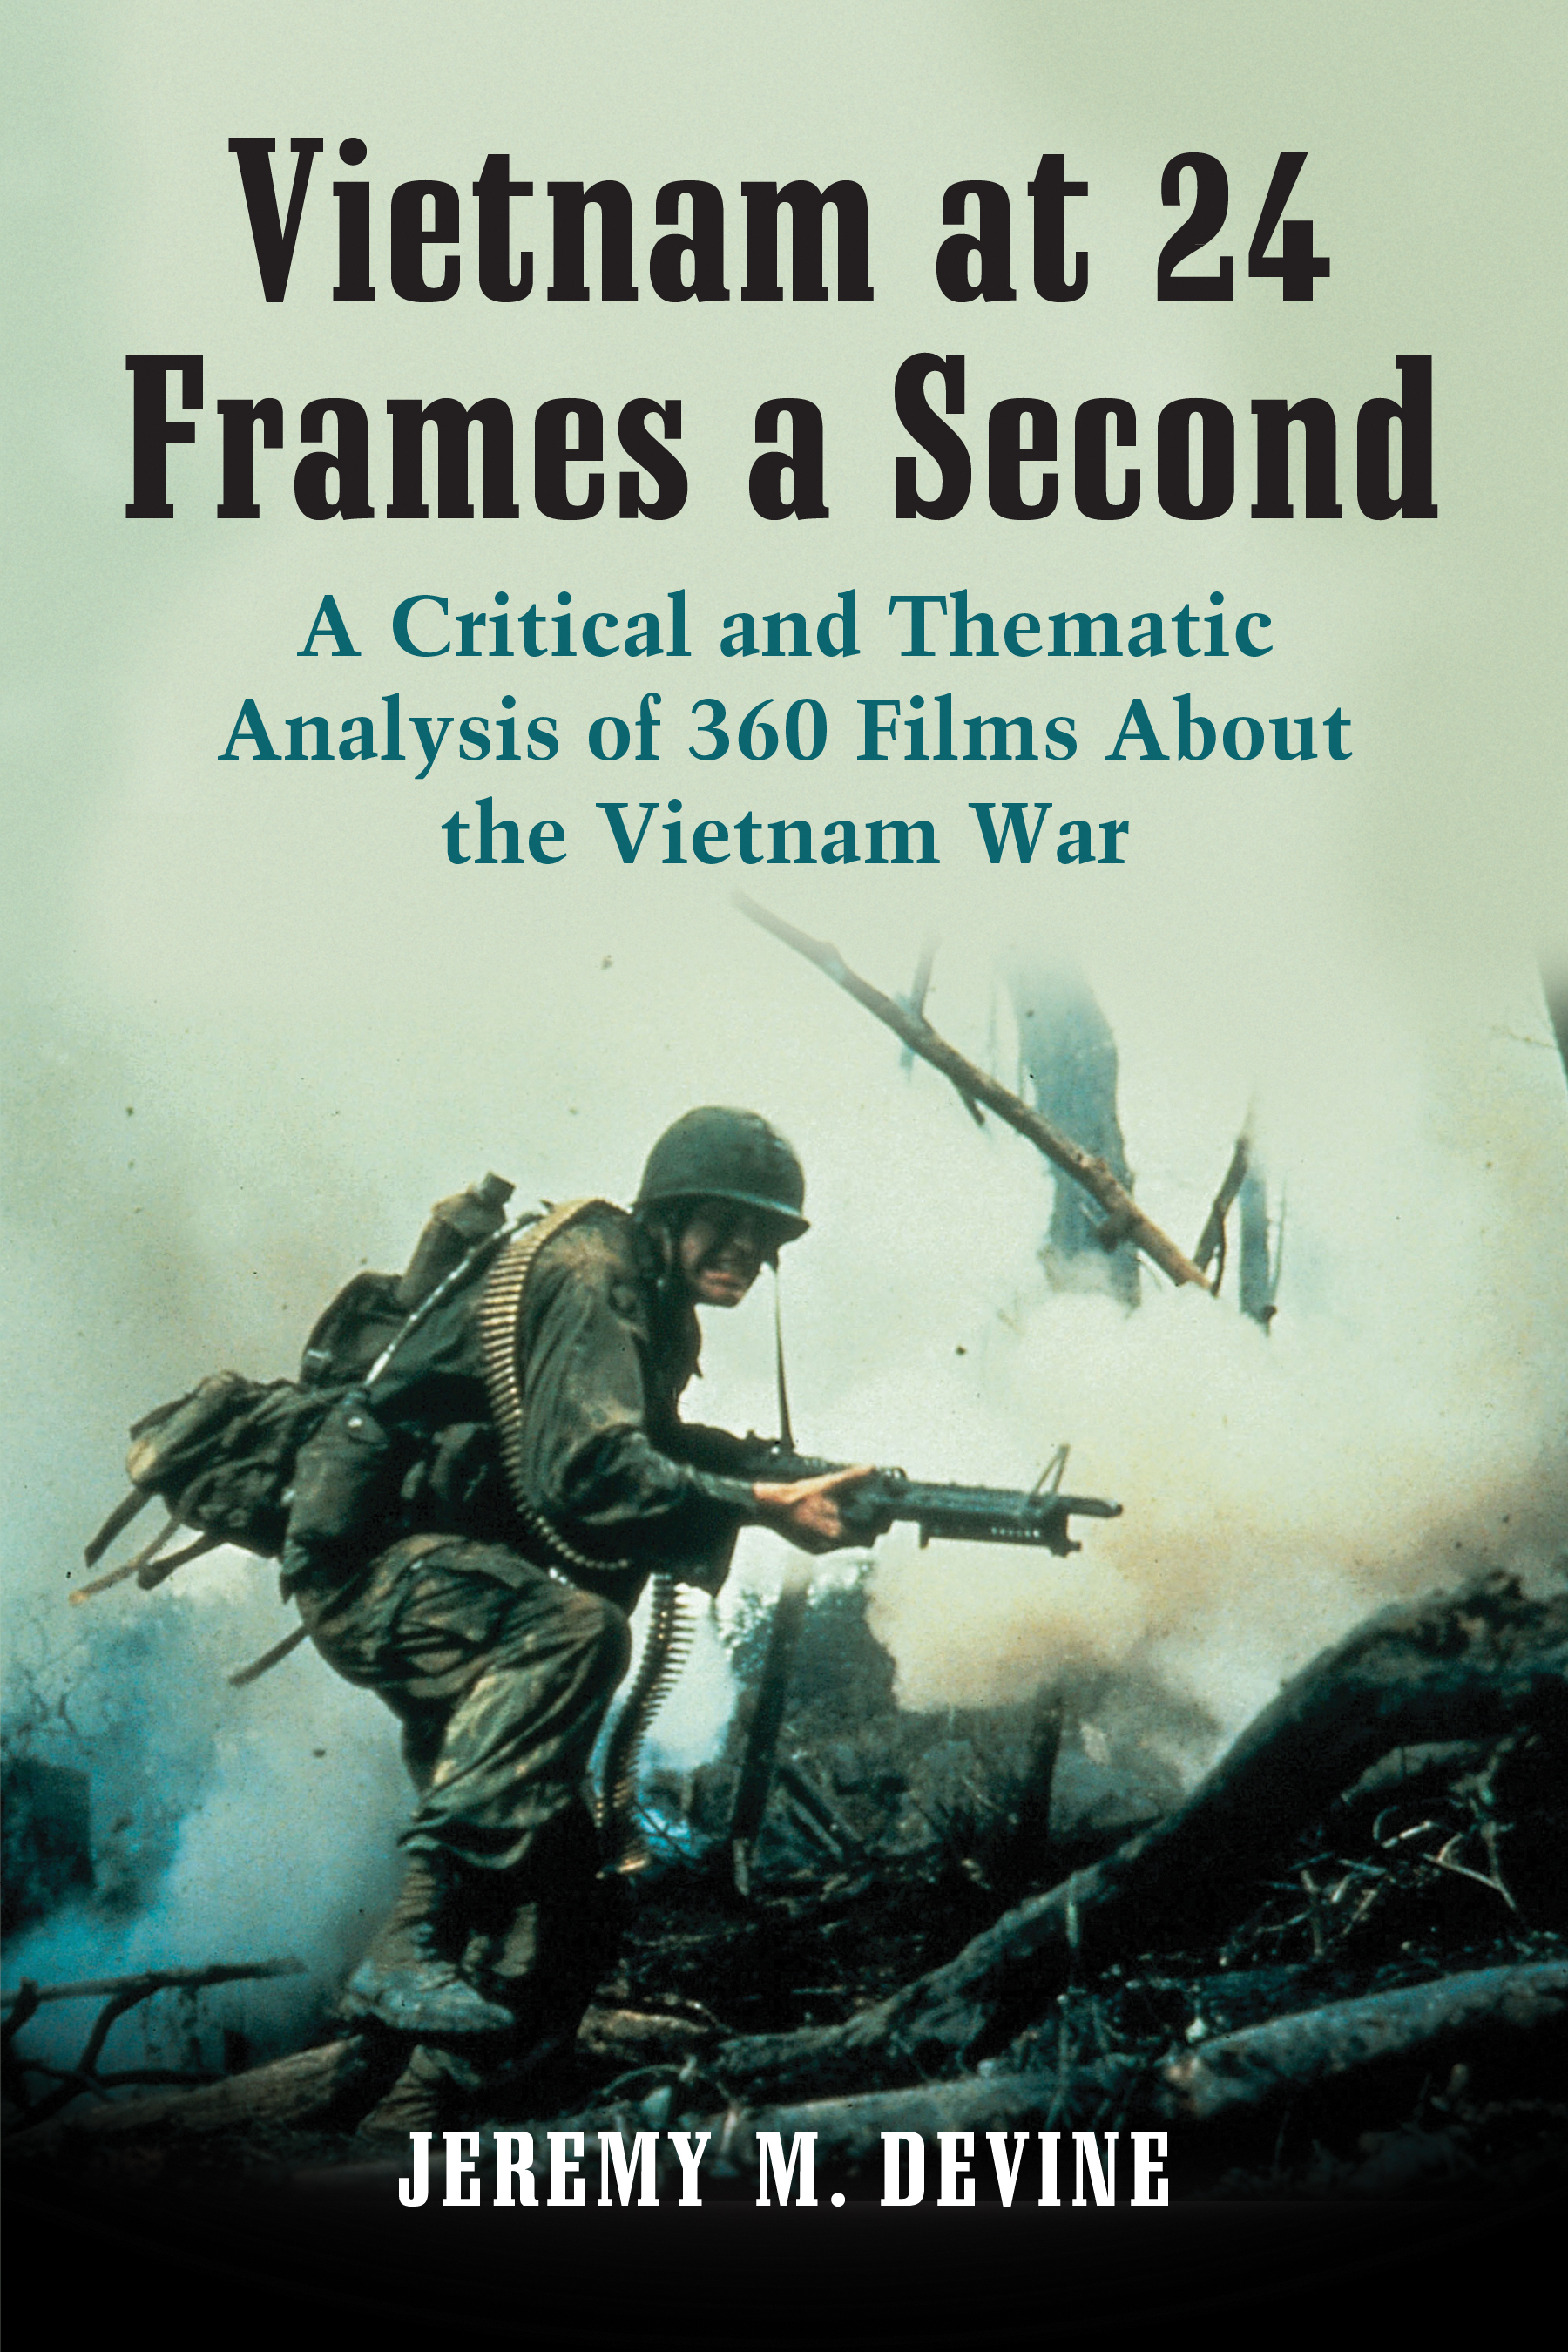 Vietnam at 24 Frames a Second A Critical and Thematic Analysis of 360 Films About the Vietnam War - image 1